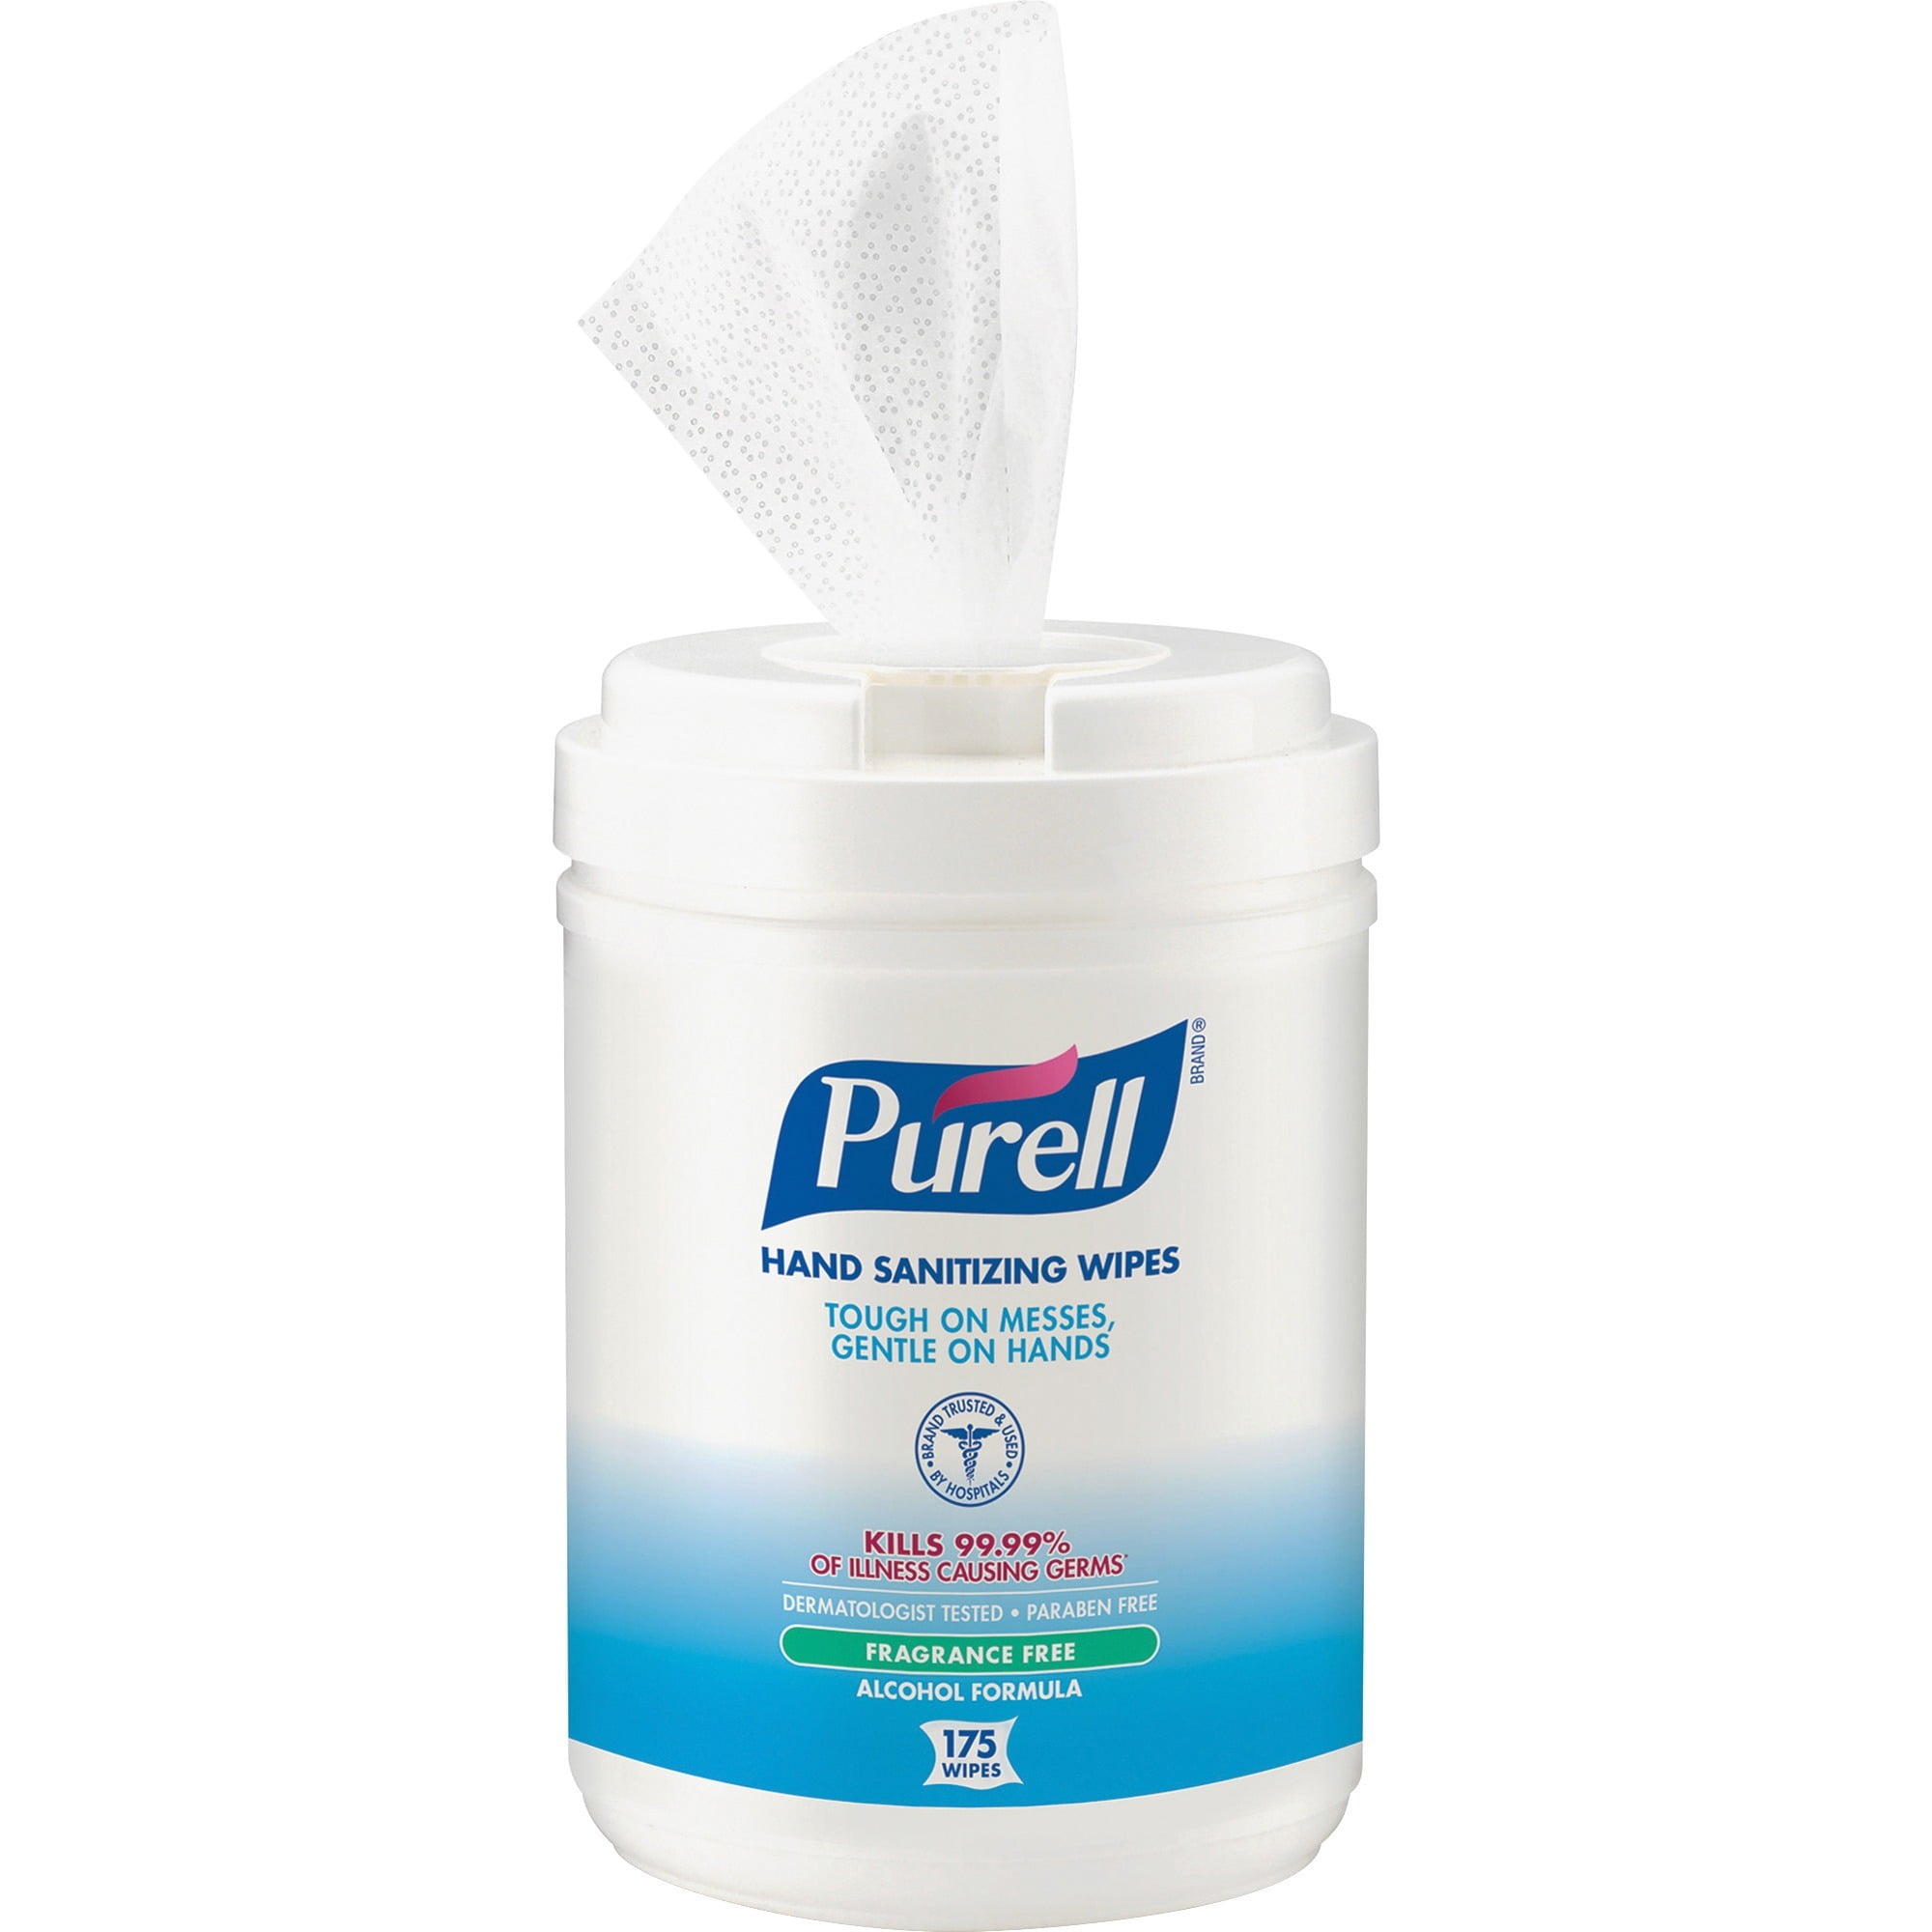 GOJO® Purell® Professional Surface Disinfecting Wipes - 110 ct. Canister